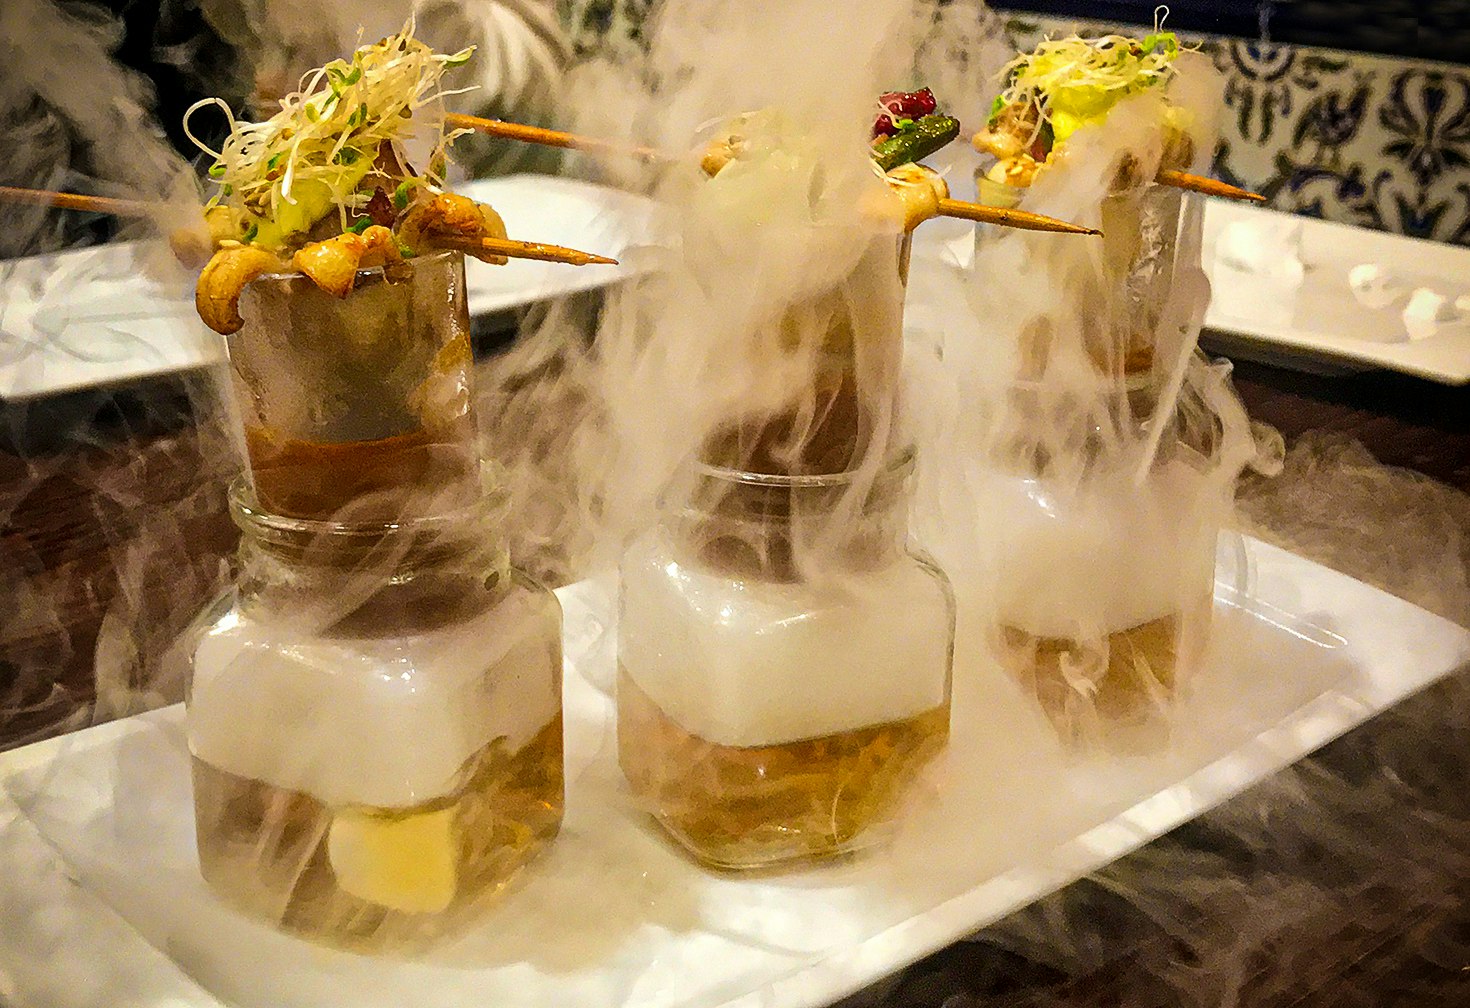 Seafood skewers are balanced on top of steaming glass tumblers, which resemble test tubes, in a display of high gastronomy at a restaurant in Castilla y Leon, Spain